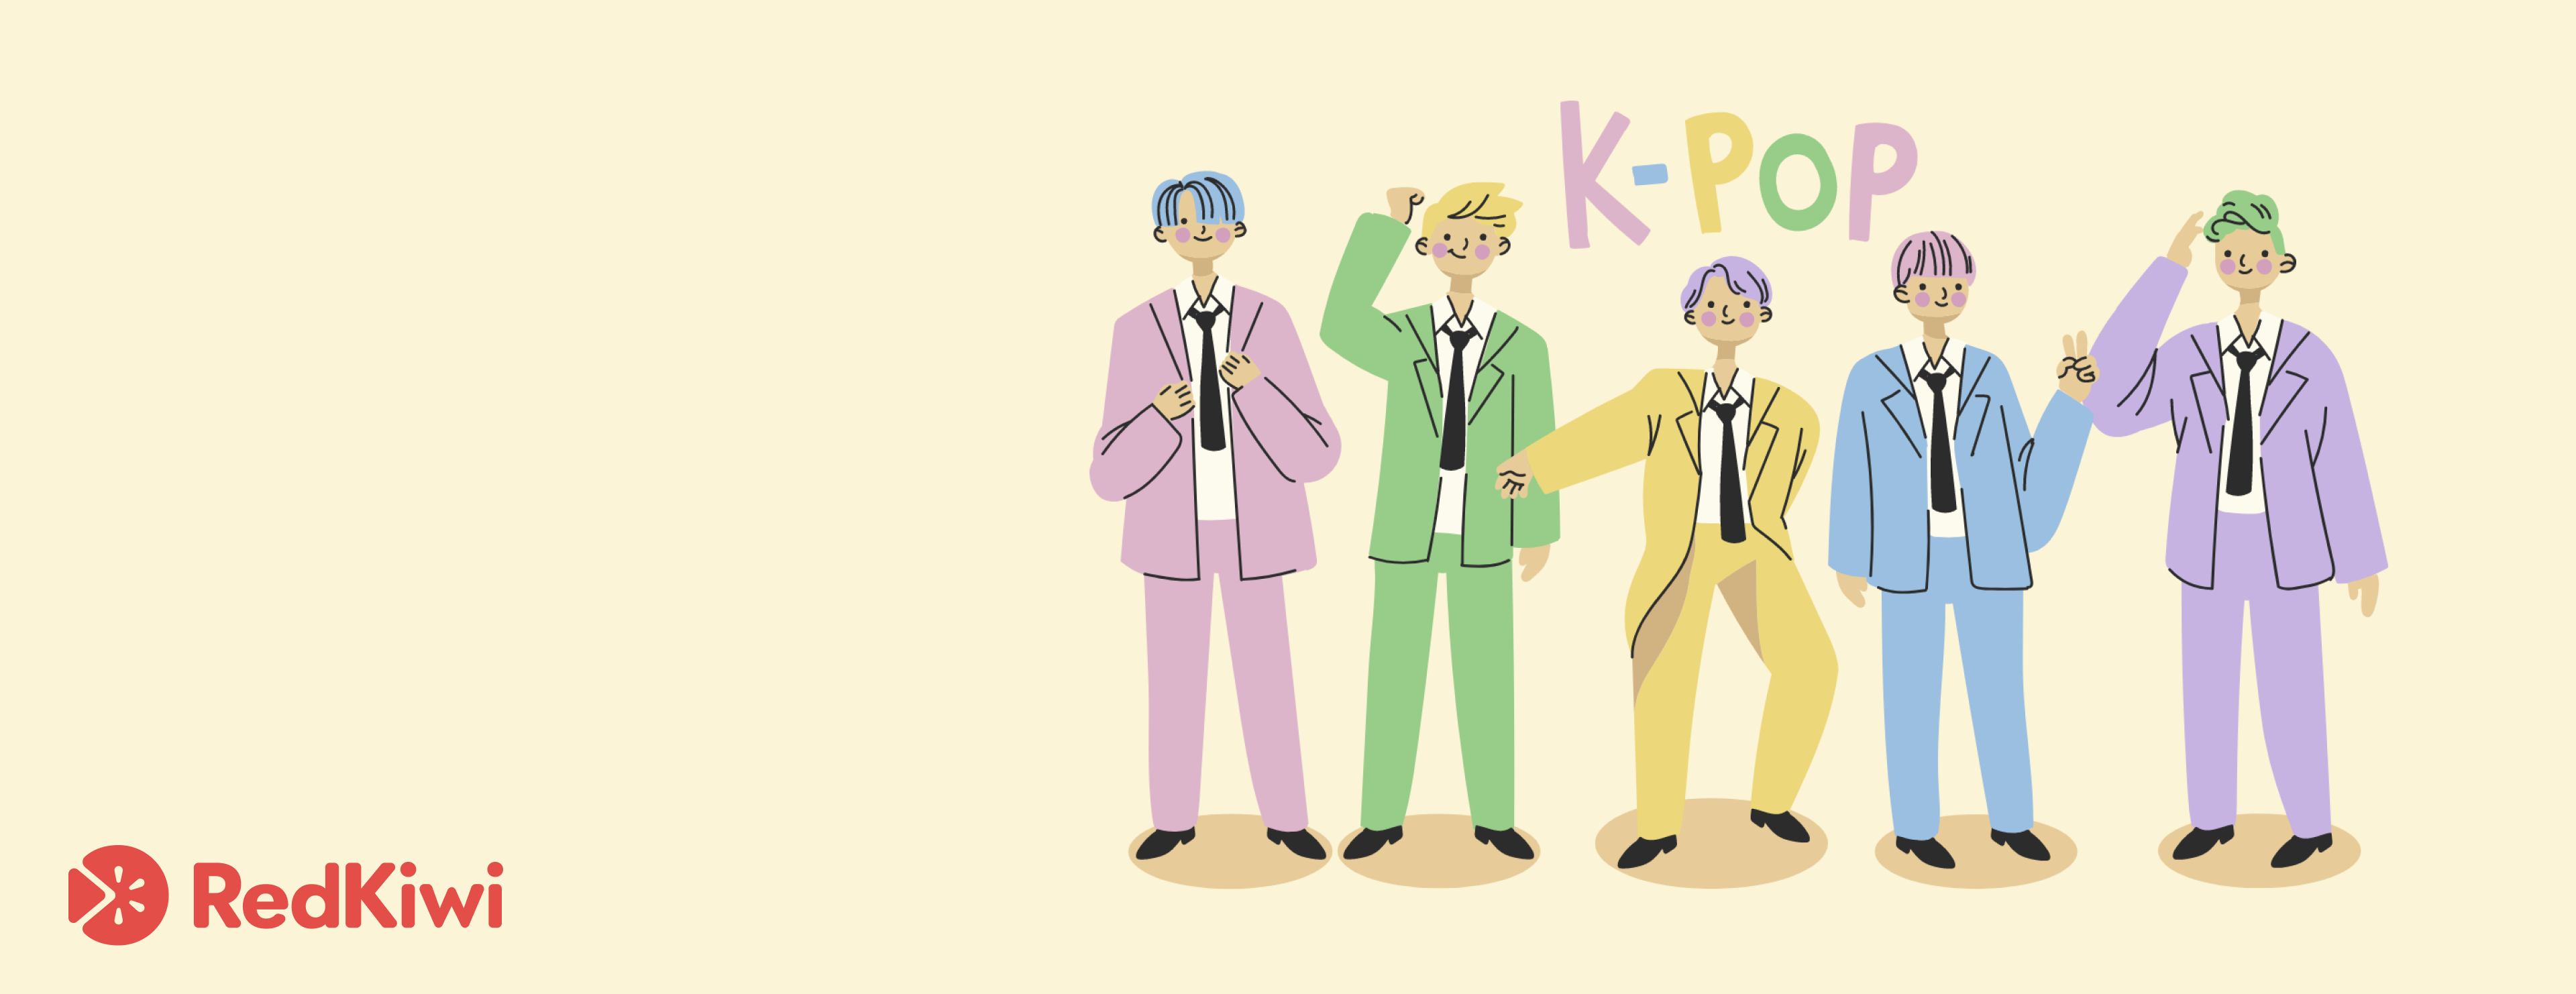 Click if You Know Your K-pop! Click if You Want To Make Friends Who Like K-pop!